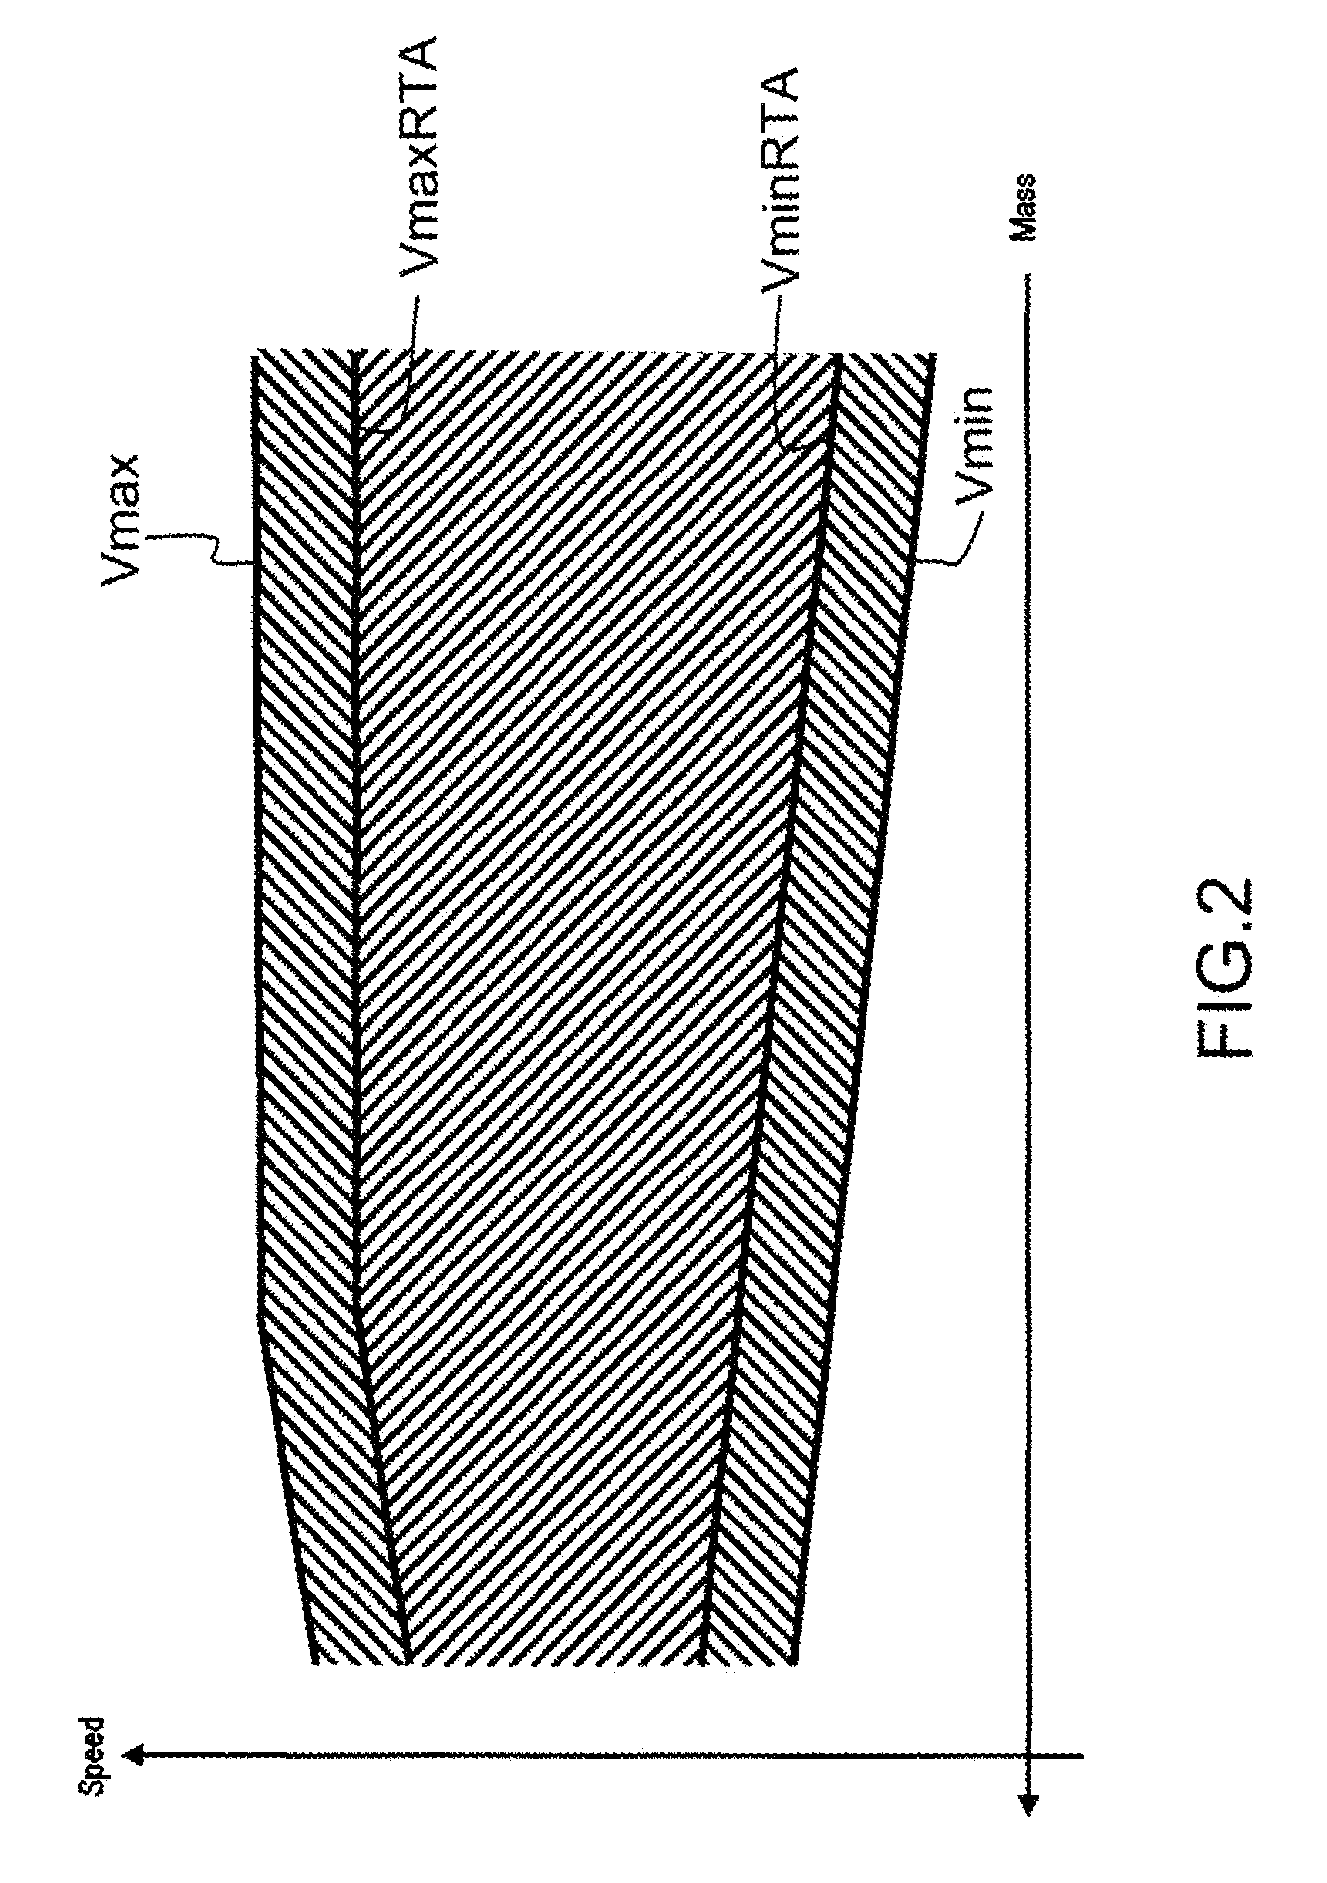 Method for assisting in the management of the flight of an aircraft in order to keep to a time constraint